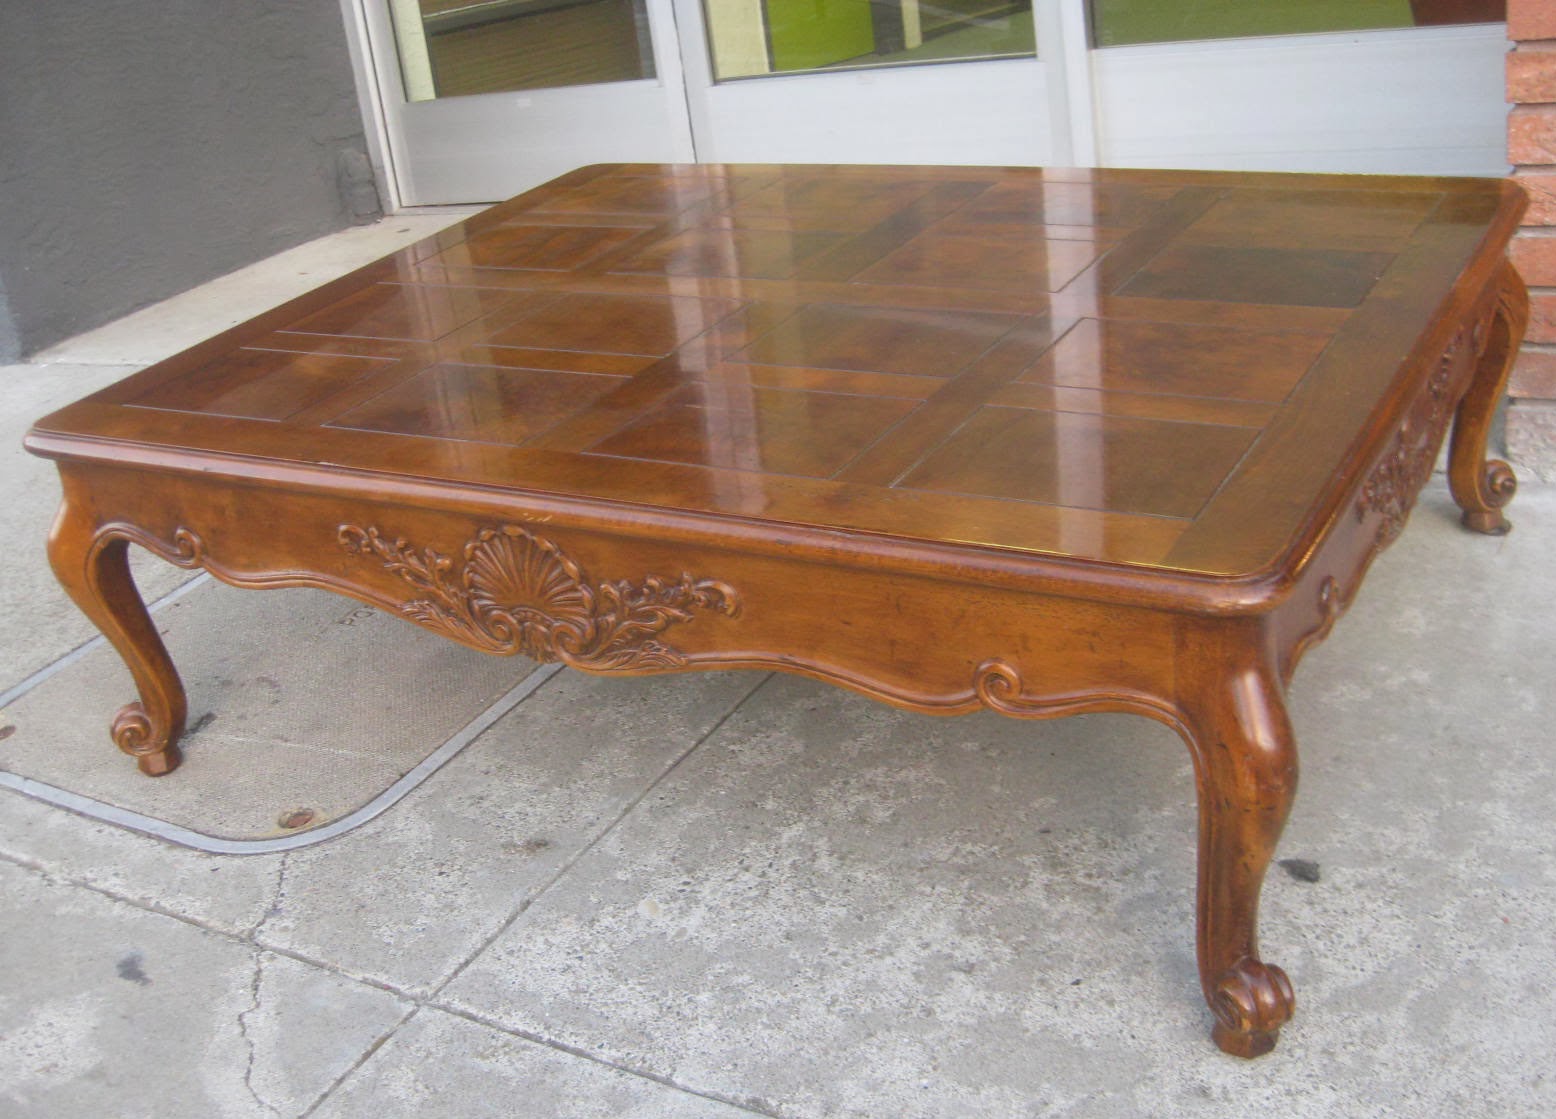 UHURU FURNITURE & COLLECTIBLES: SOLD - Large Coffee Table - $50